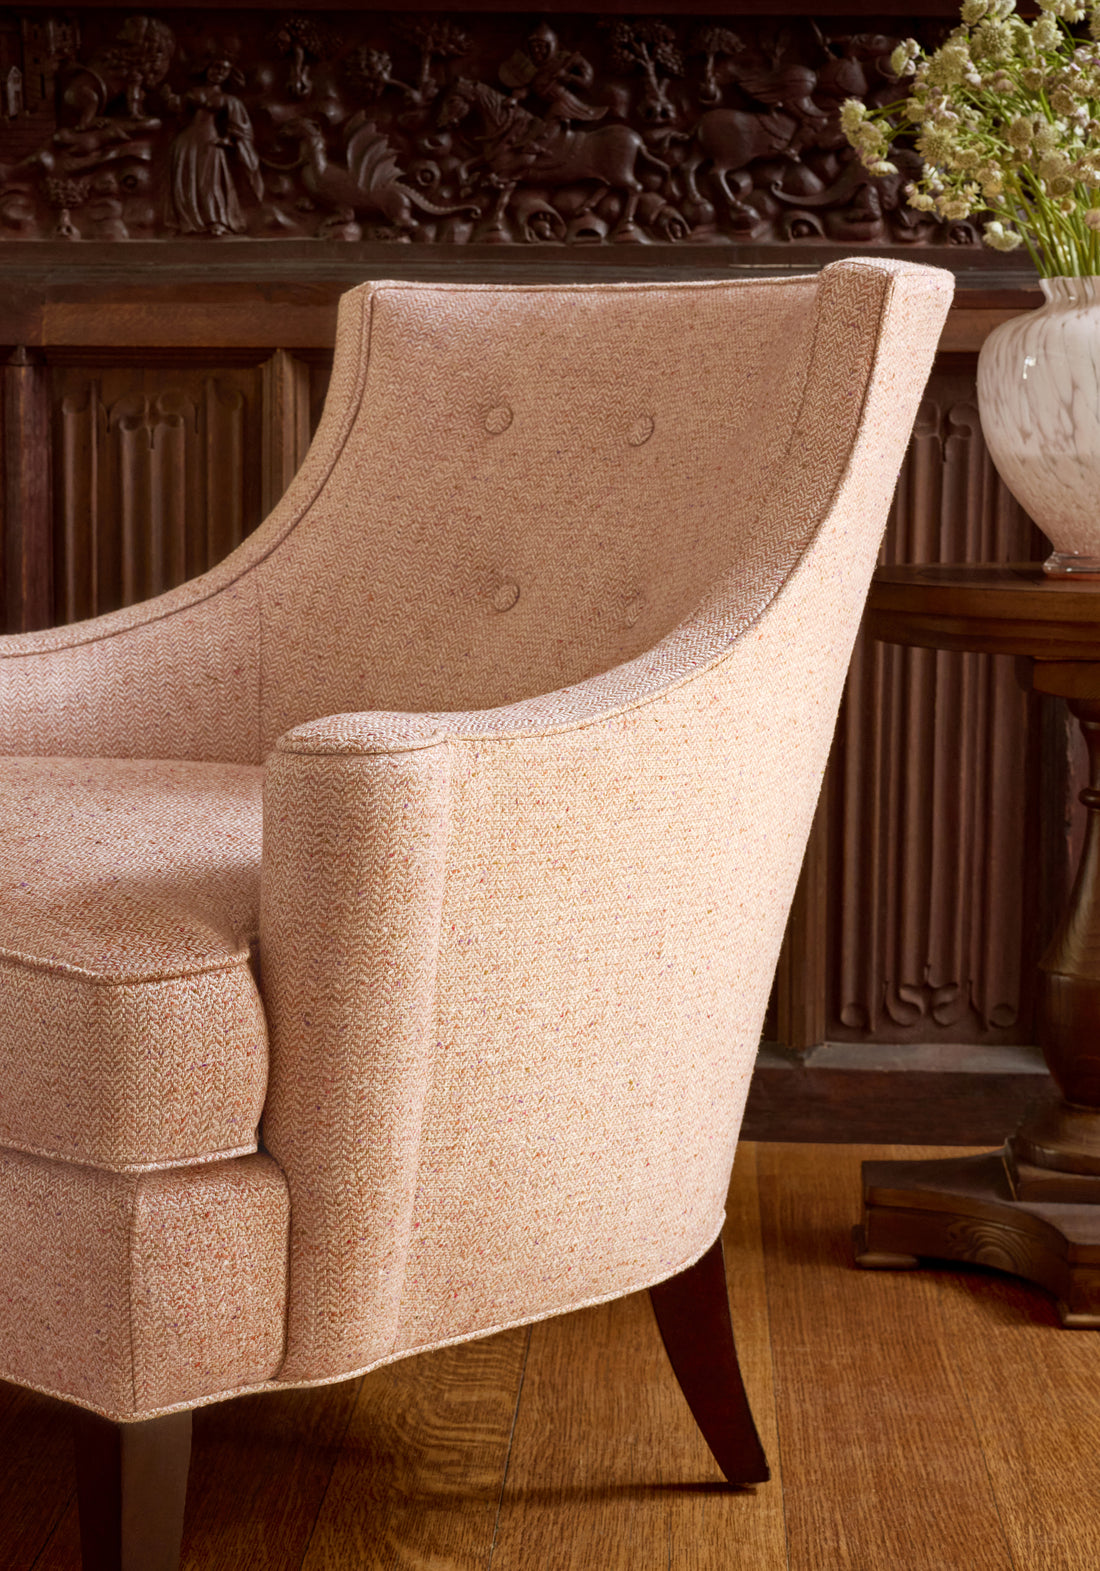 Emerson Chair in Heath woven fabric in Apricot color - pattern number W80926 - by Thibaut fabrics